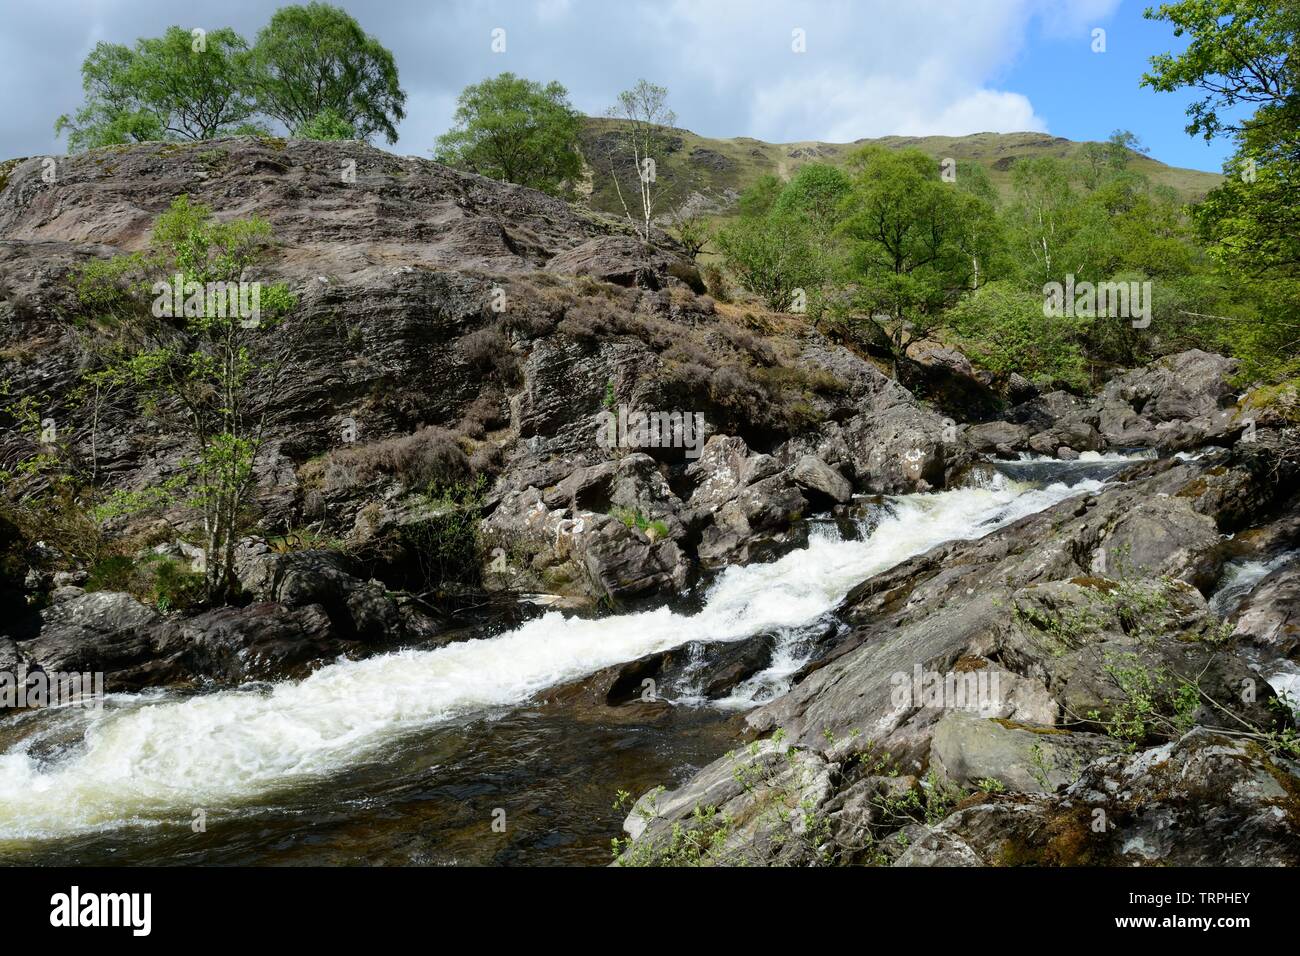 River Towy flowing through rocks rocky valley and trees in spring Gwenffryd Dinas Nature Reserve Upper Towy Valley Rhandirmwyn Carmarthenshire Wales Stock Photo